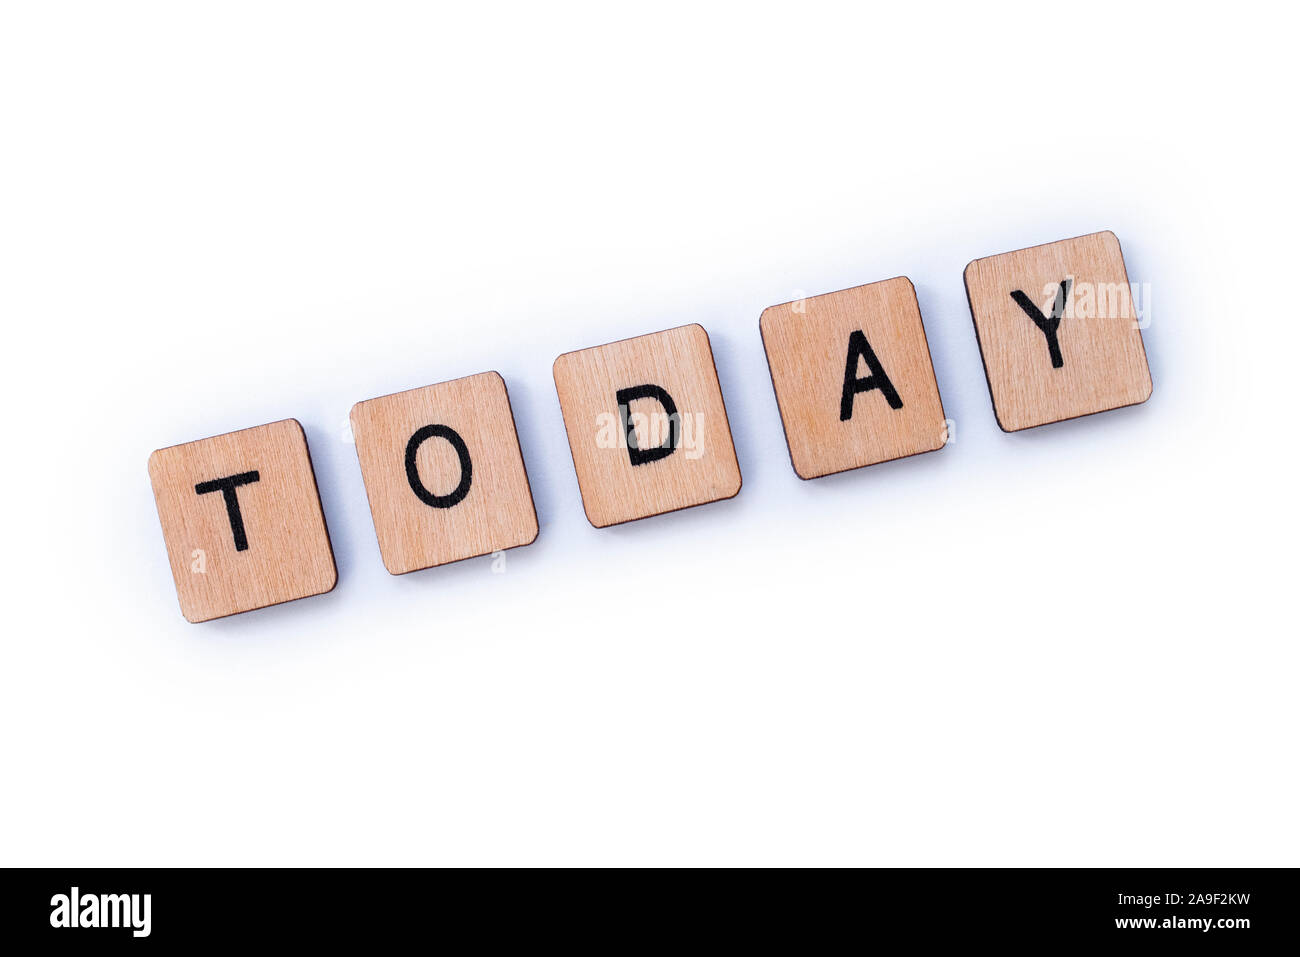 The word TODAY, spelt with wooden letter tiles over a white background. Stock Photo